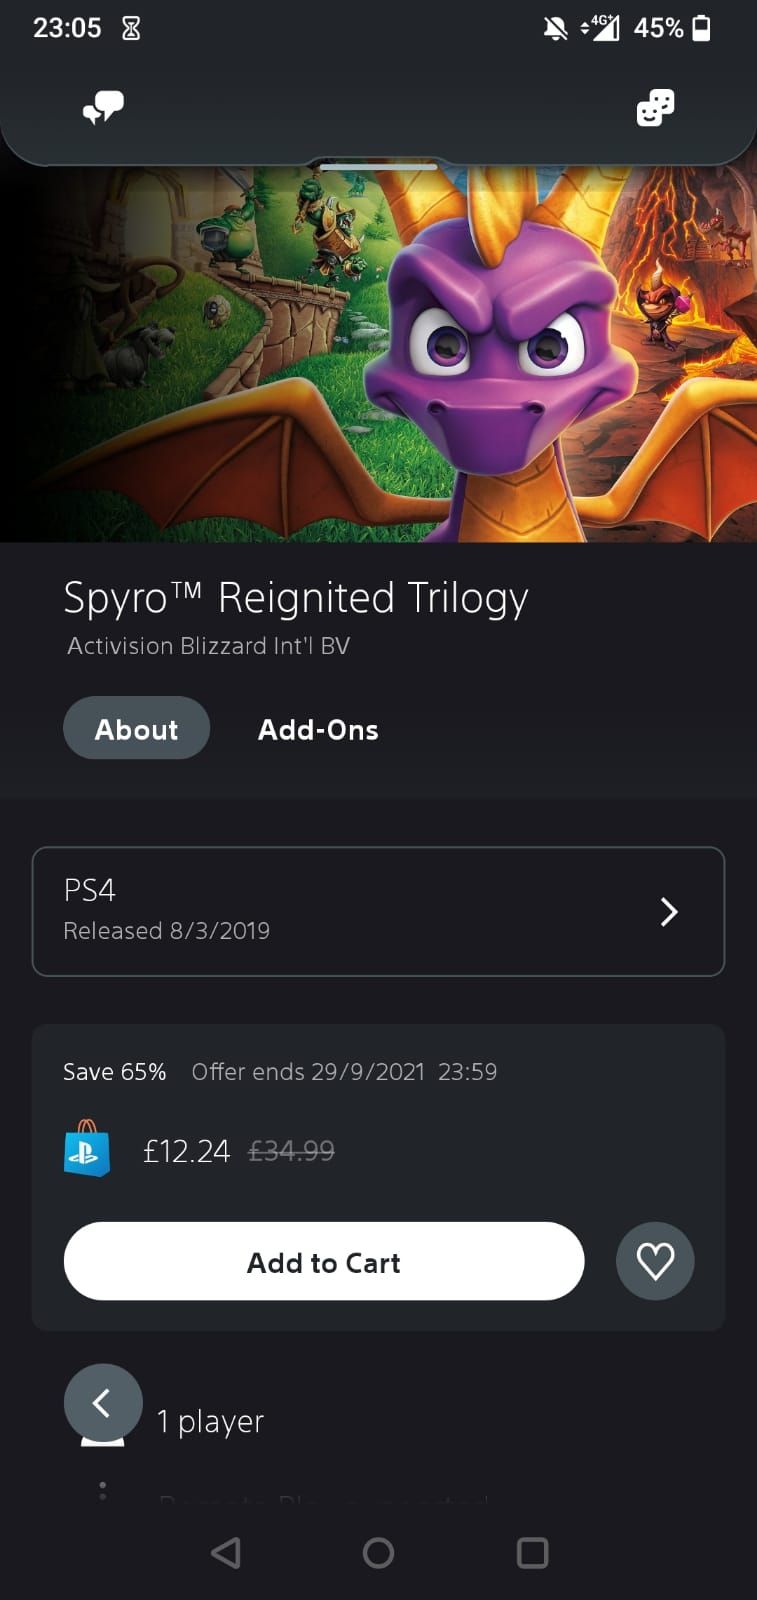 The Spyro Reignited Trilogy game page on the PS app